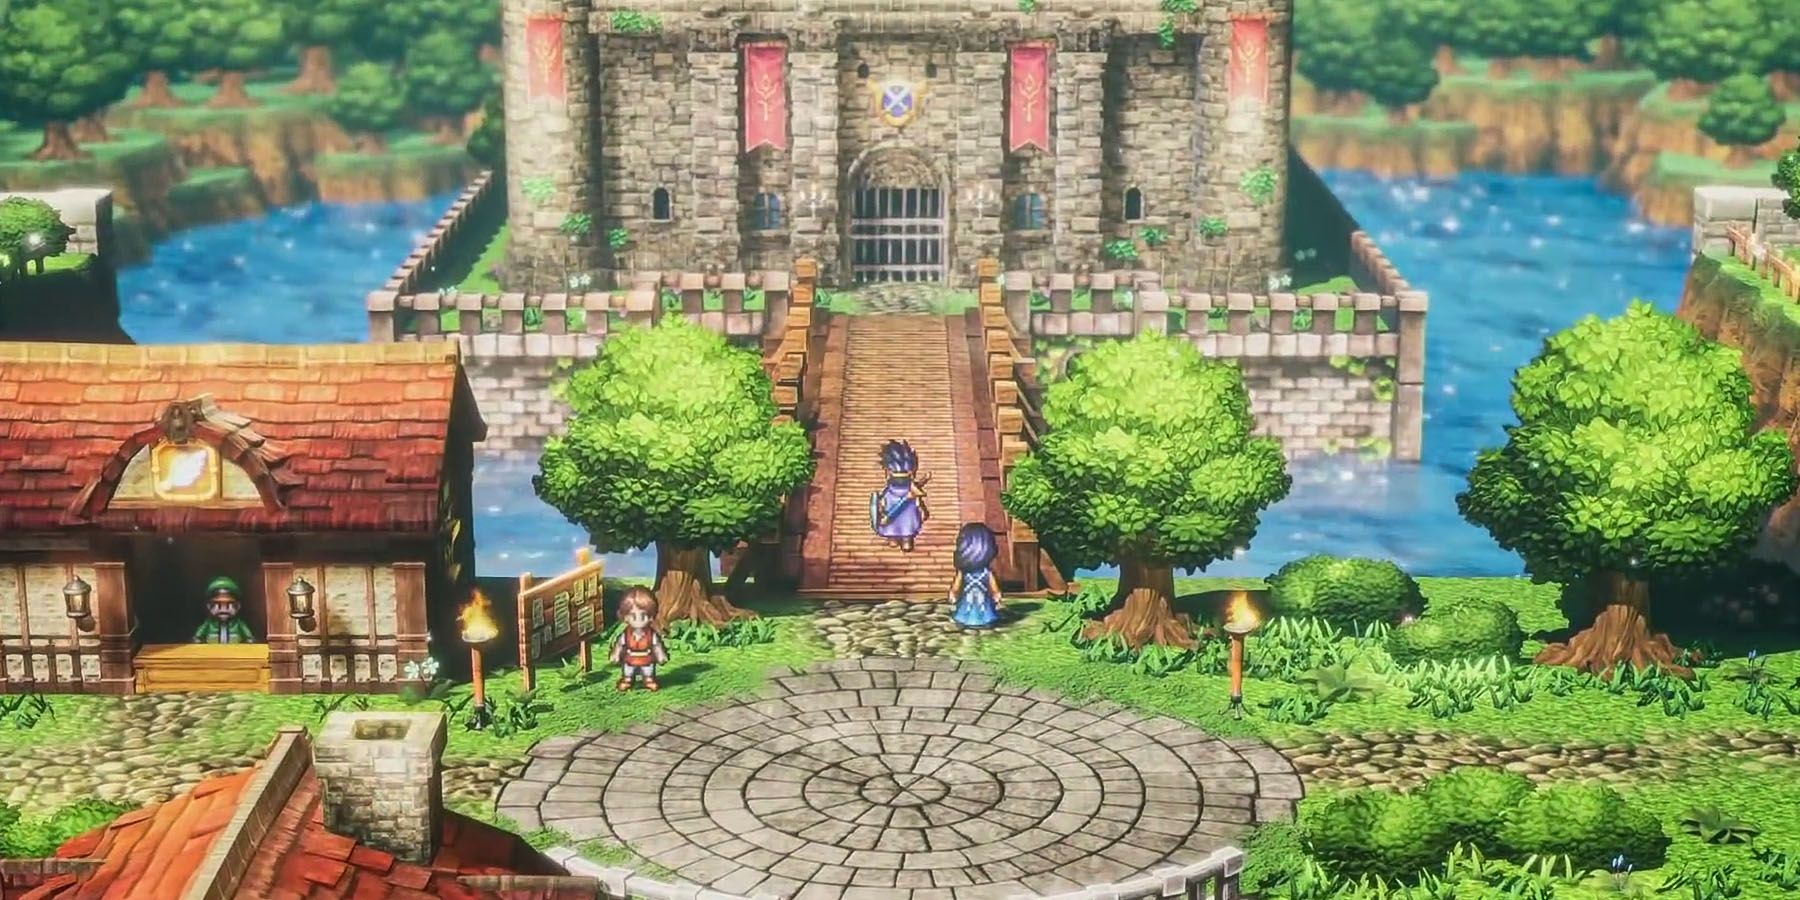 dragon-quest-3-s-hd-2d-remake-is-just-as-exciting-as-final-fantasy-7-s-trilogy